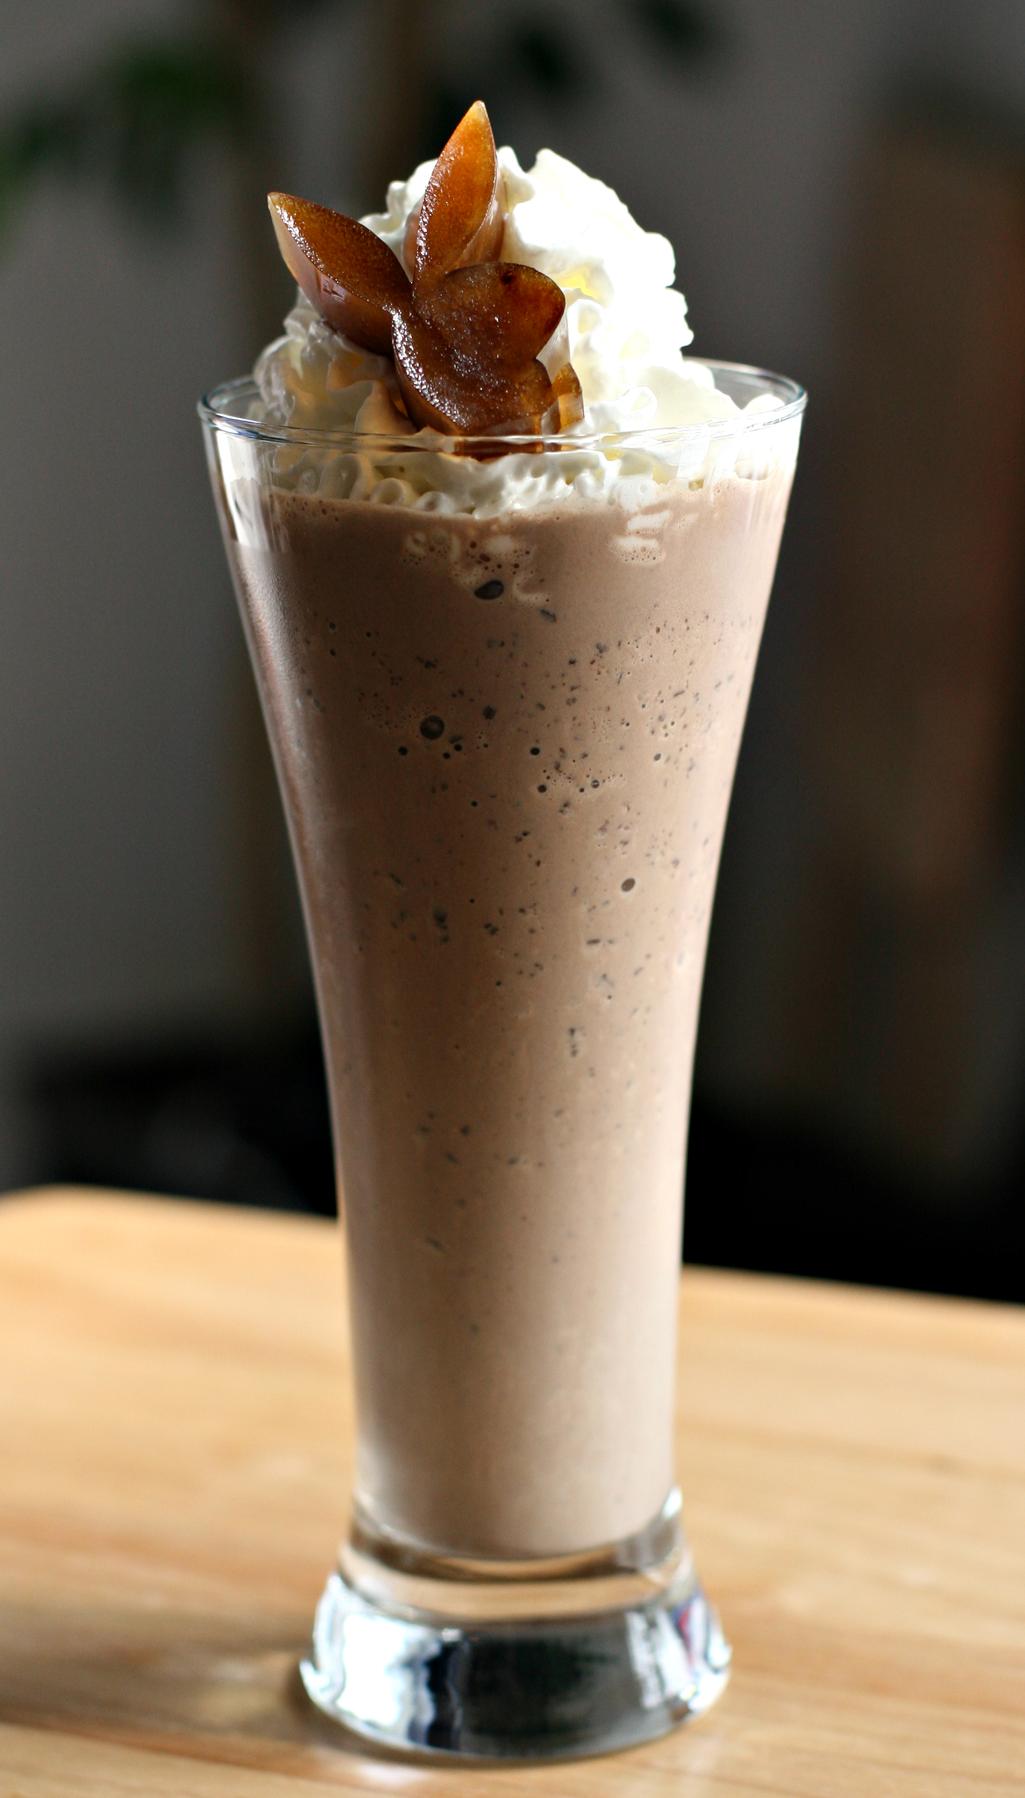  Cool down and perk up with our refreshing Mocha Frappe